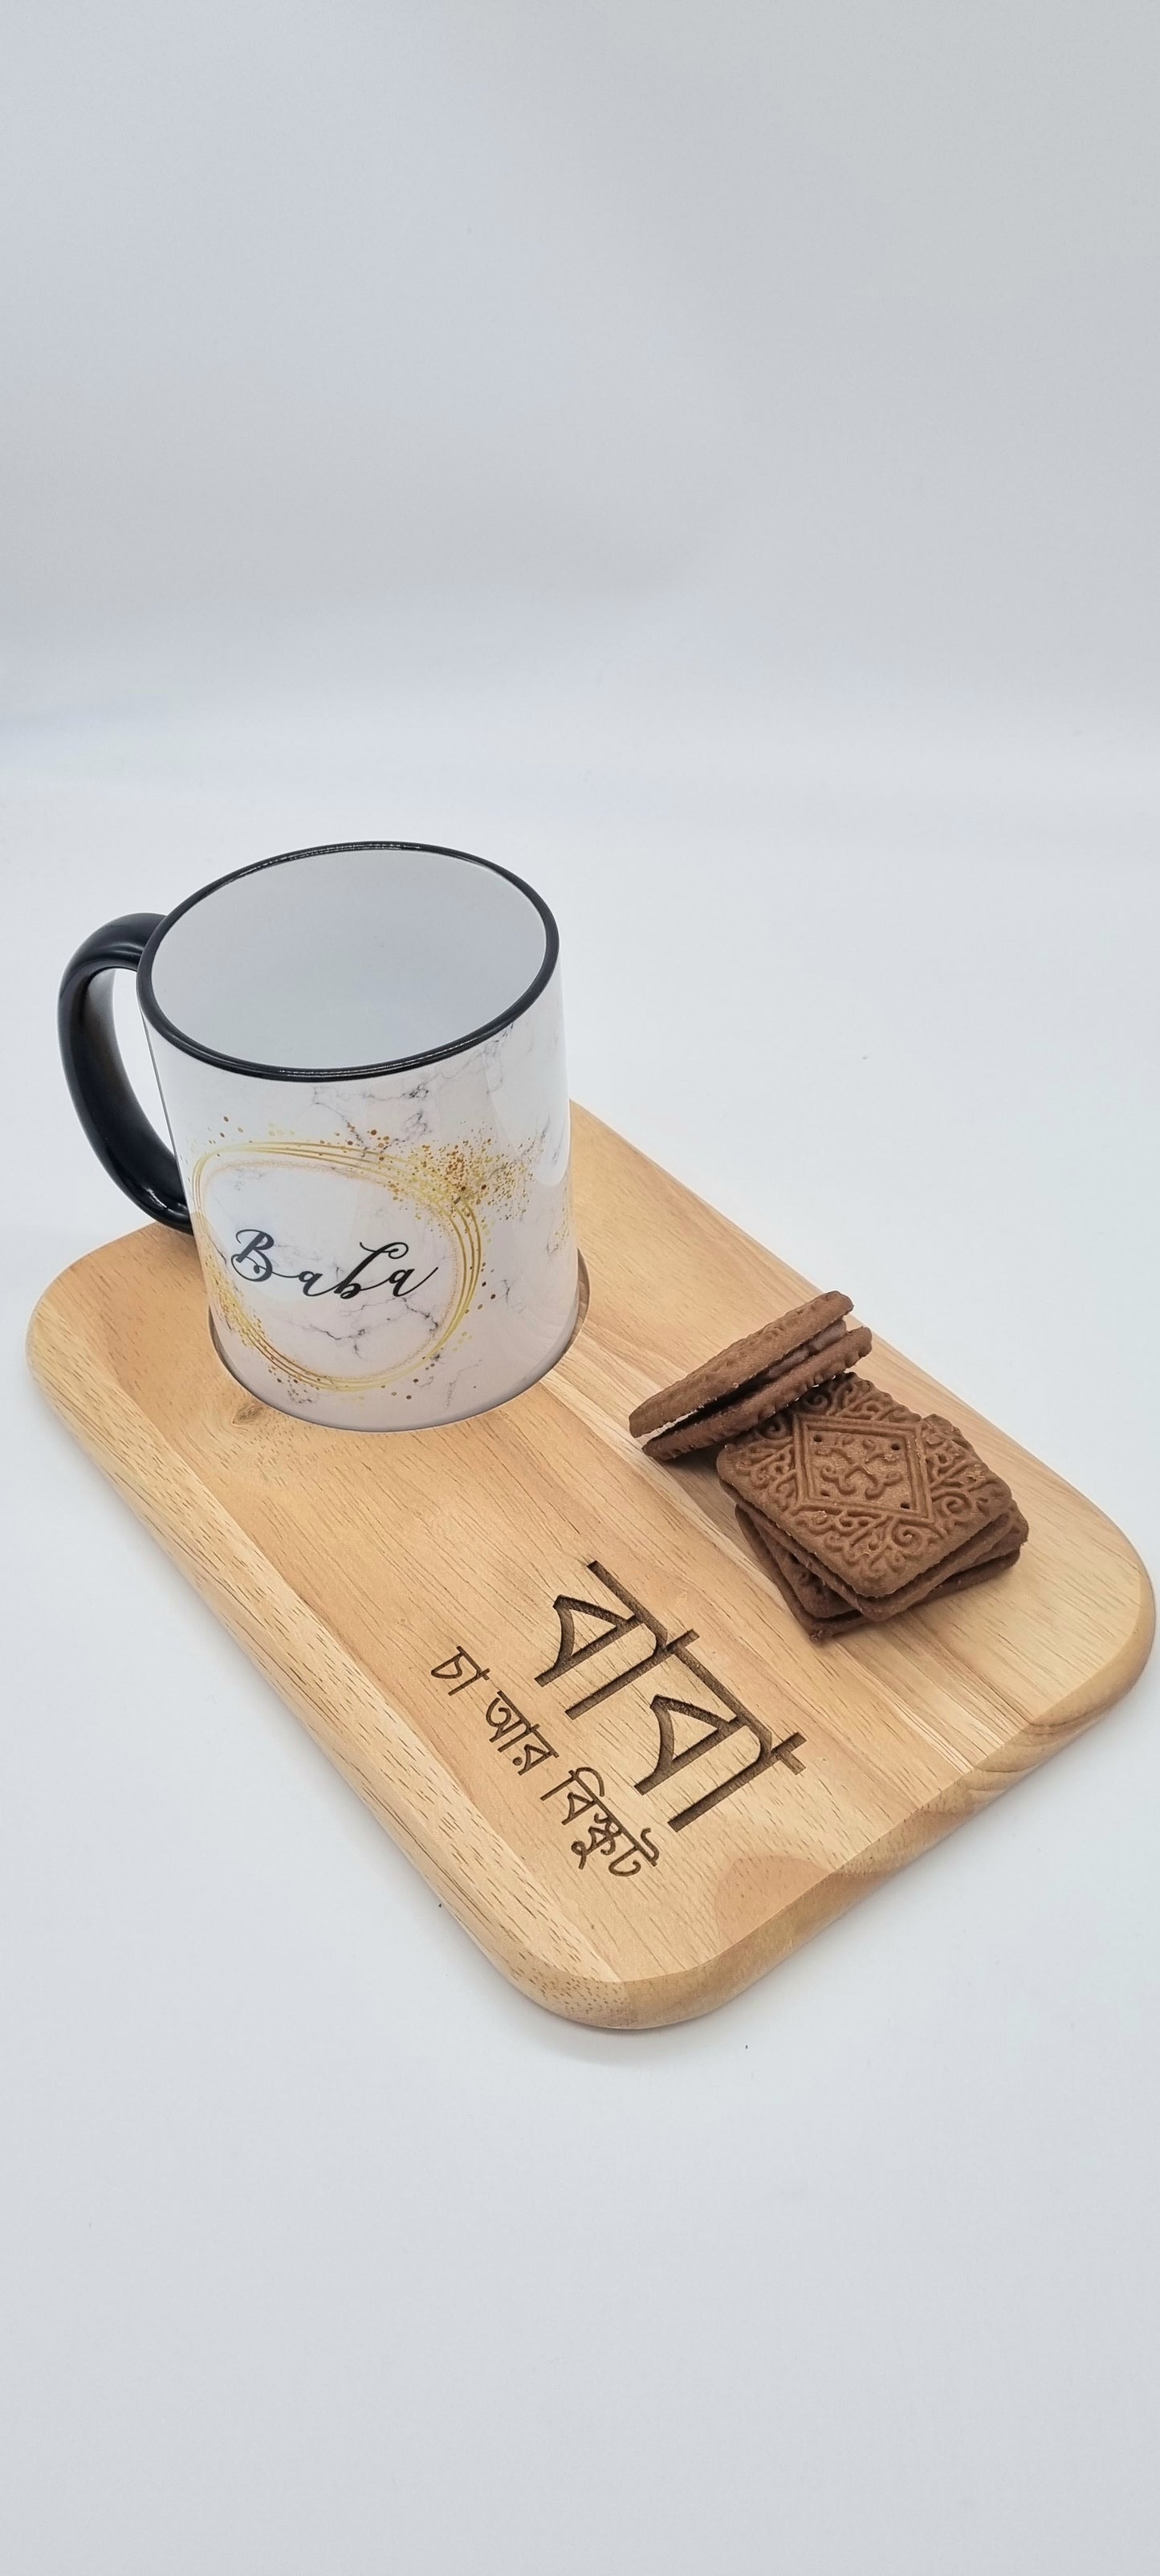 Personalised Engraved Baba's Tea & Biscuits Board in Bangla Text | Birthday Gifts for Baba, Mum, Dad or Grandparents